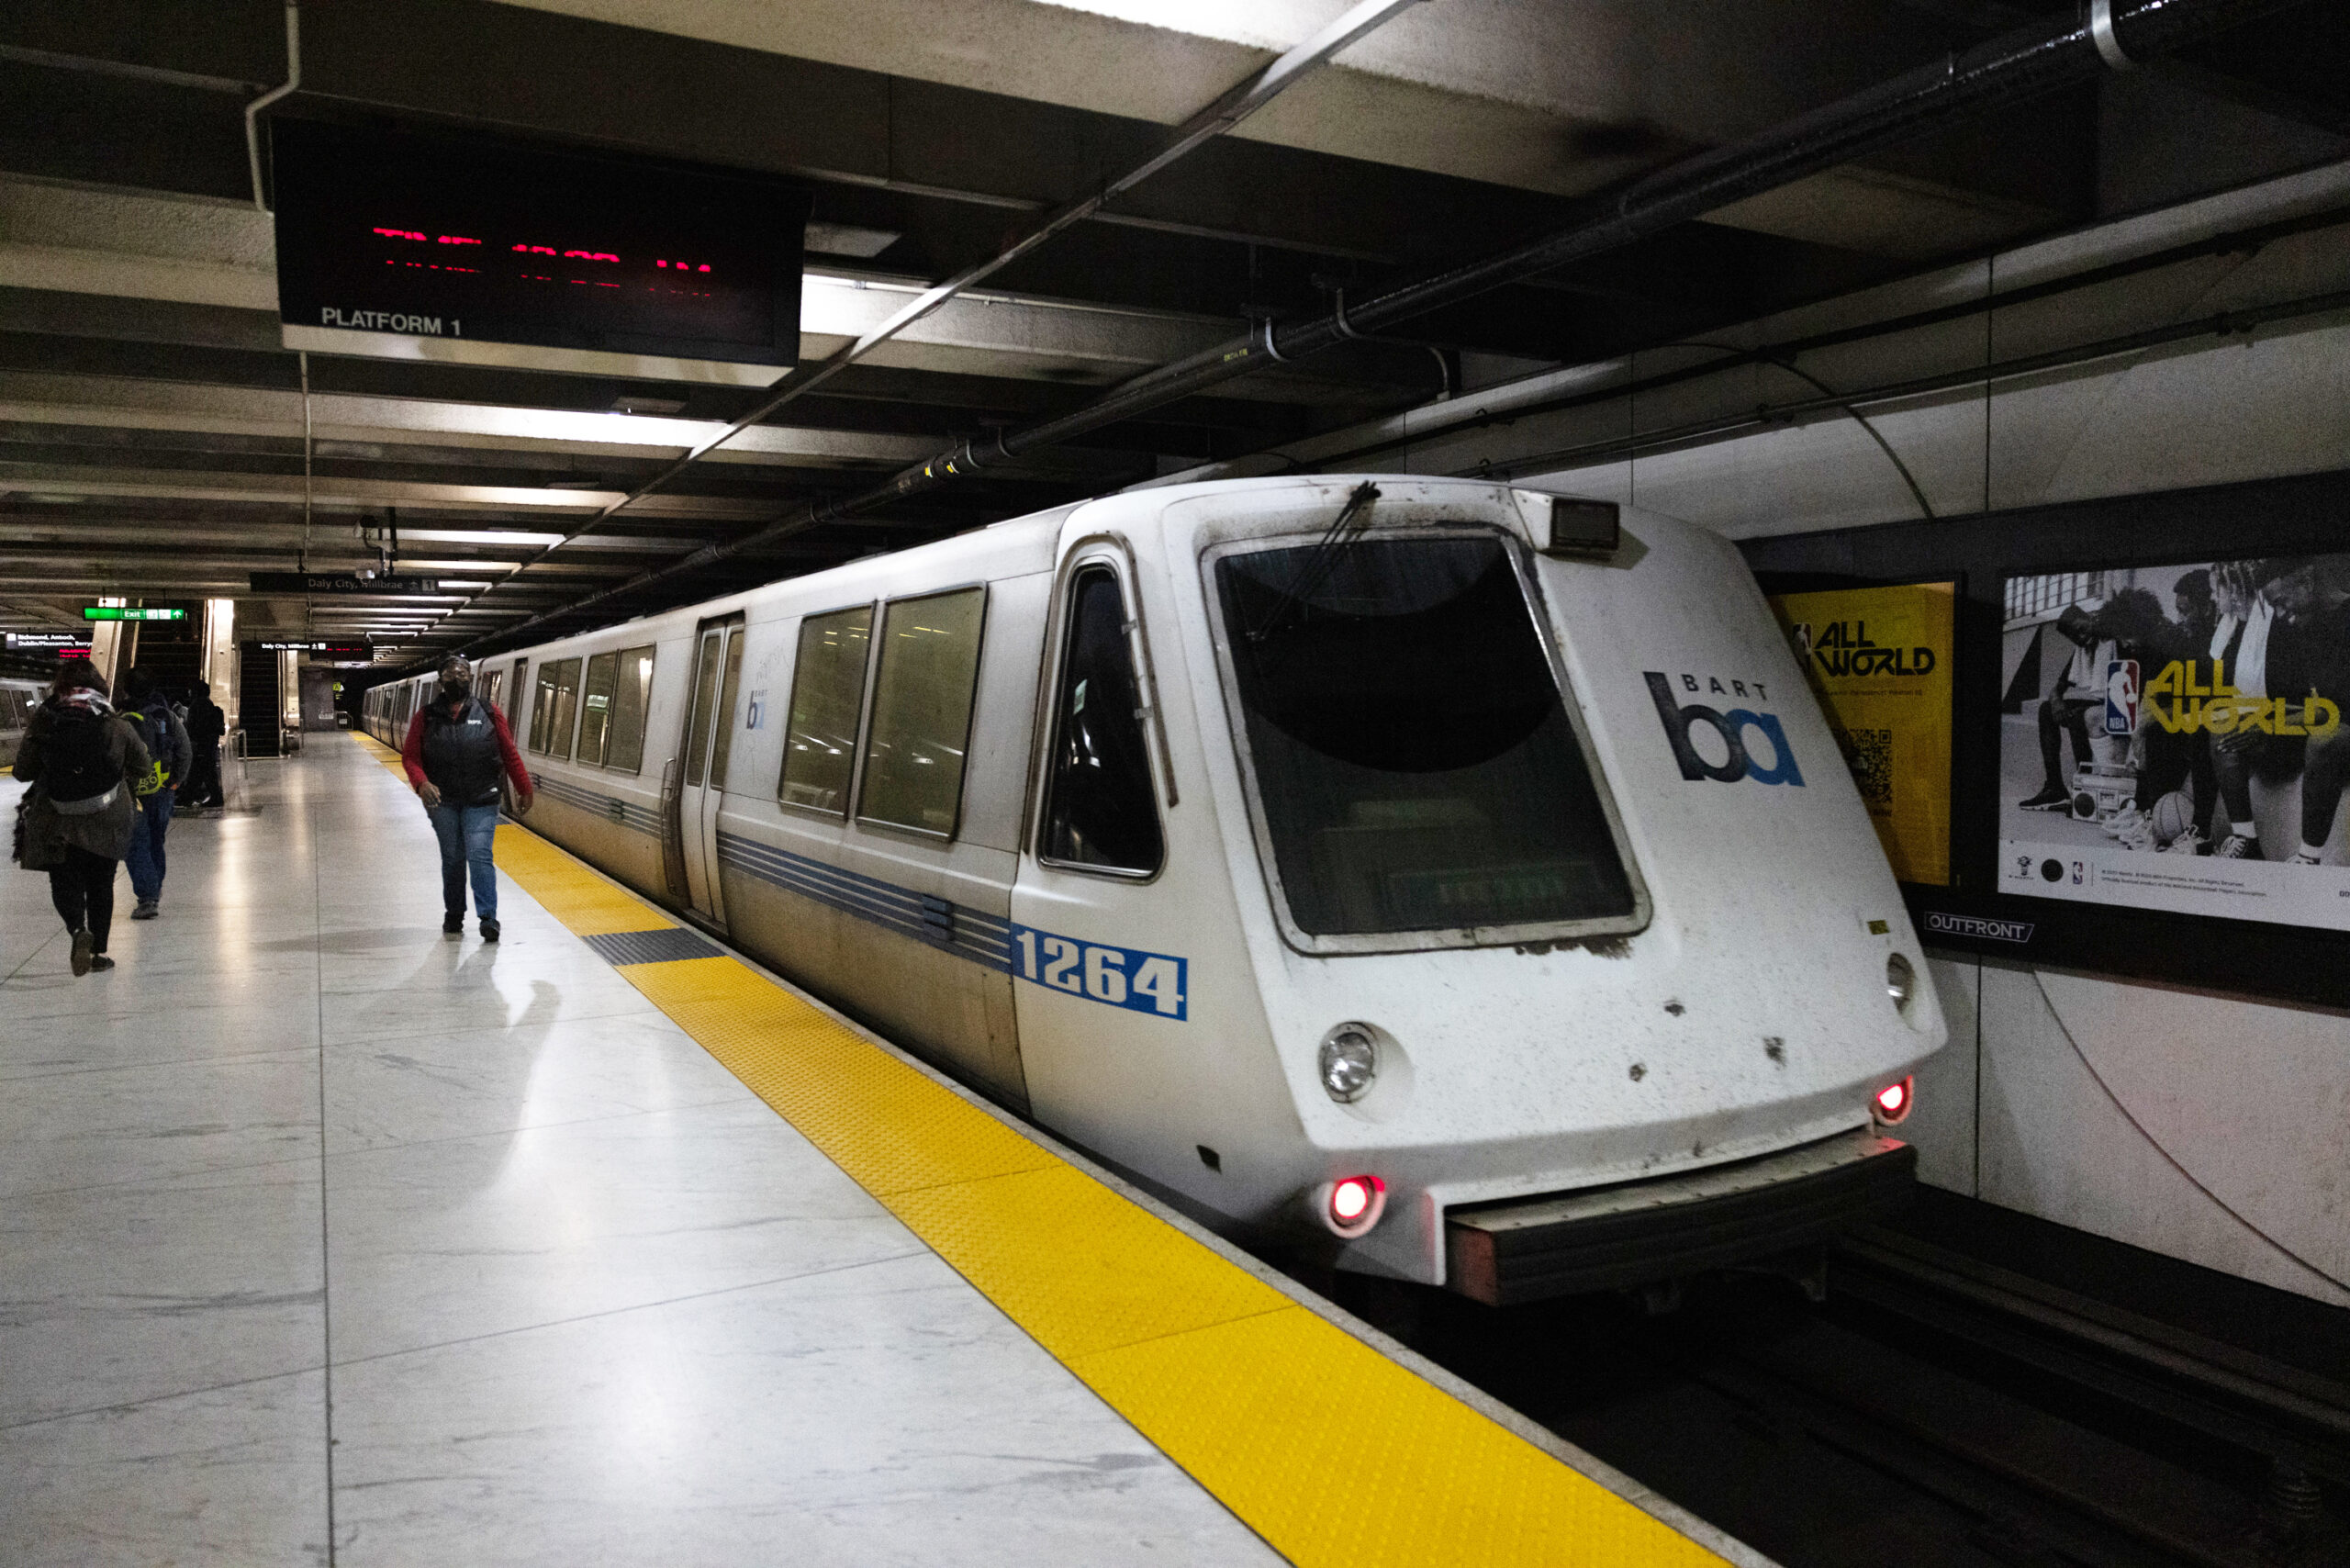 BART Resumes Oakland Airport Service After Electrical Issue on Tracks